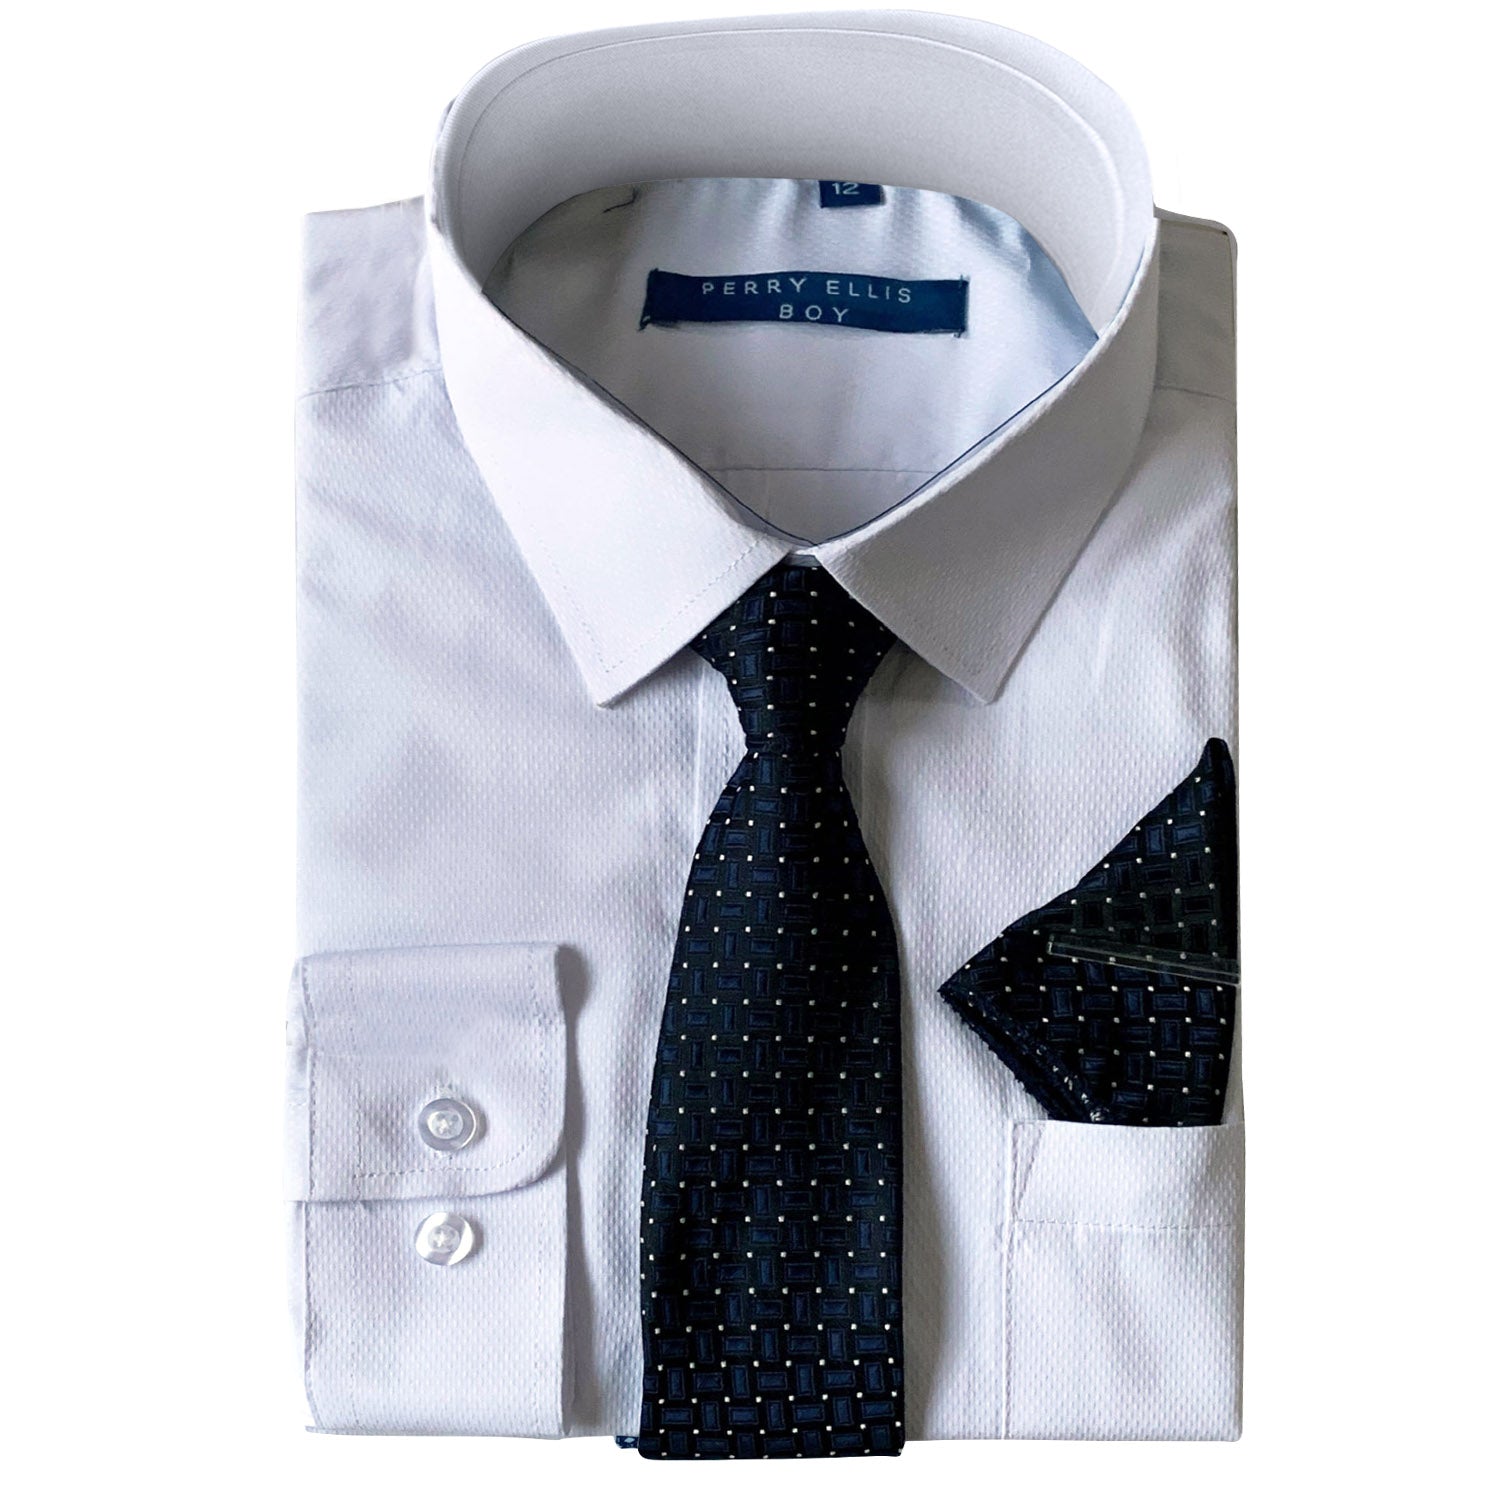 Perry Ellis Boys Dress Shirts w Navy Tie Solid Shirts w Patterned Tie